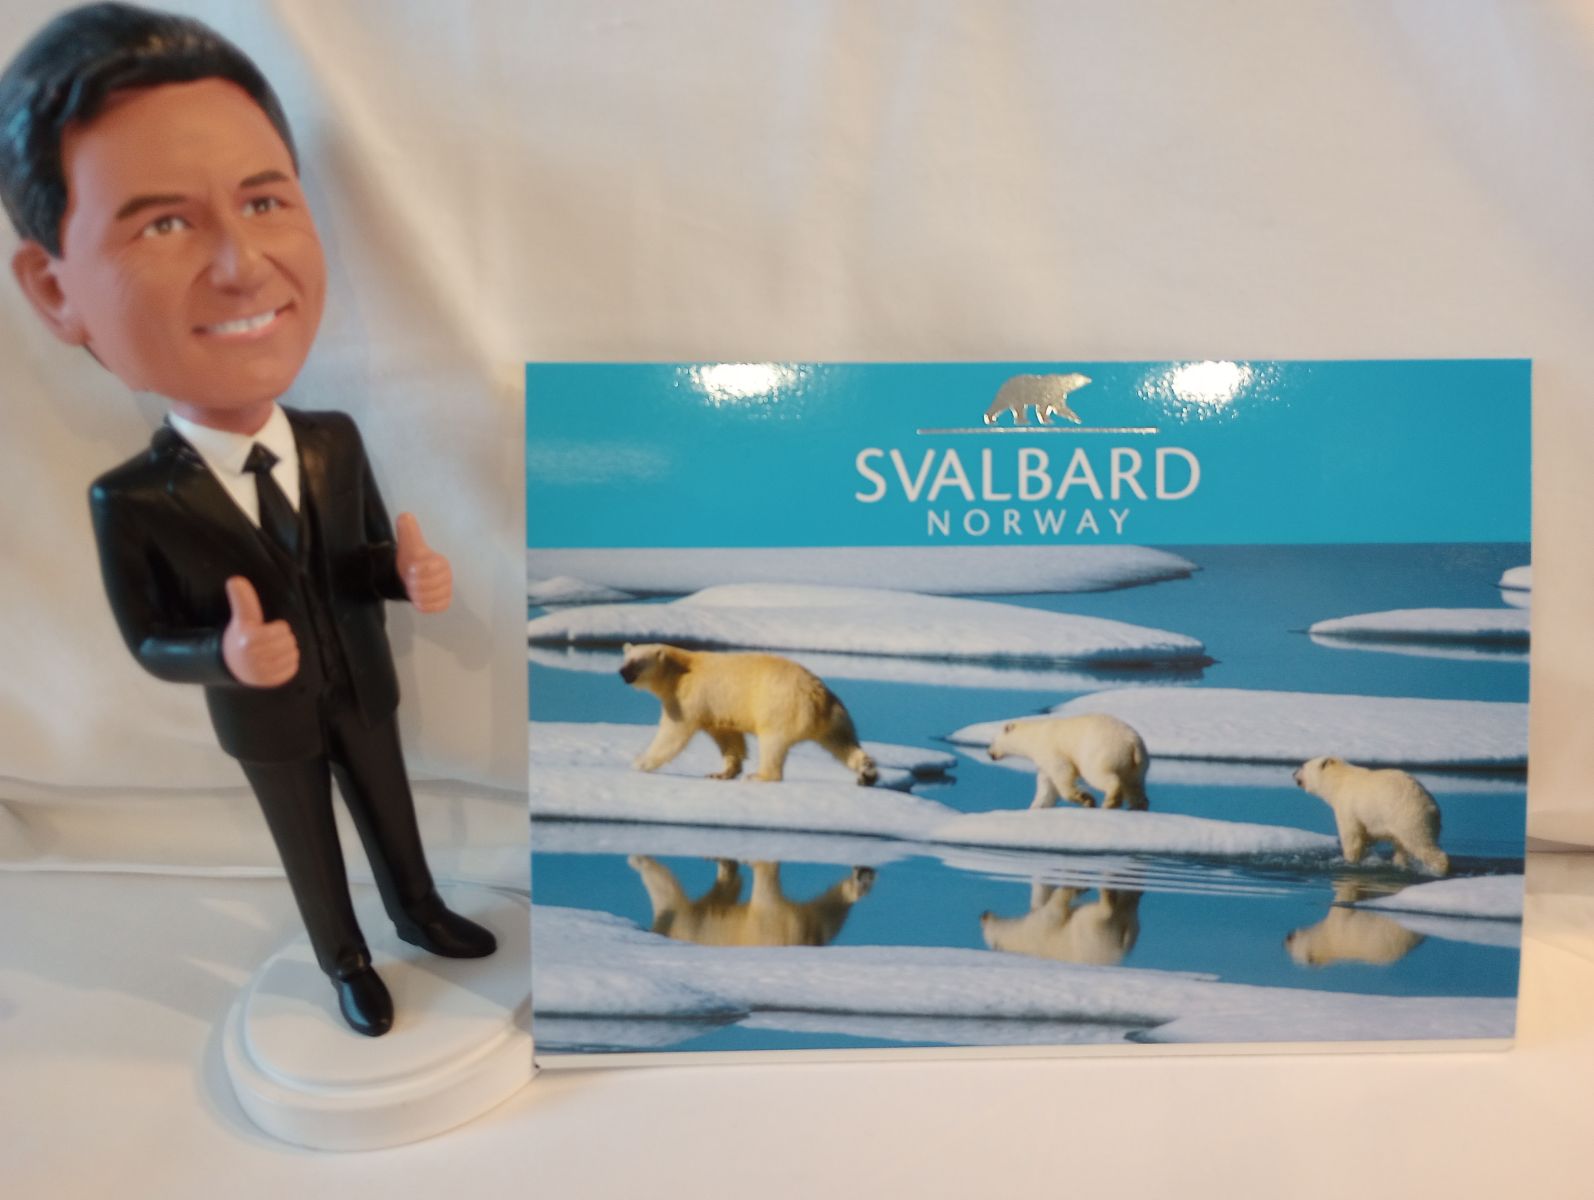 Little Jimmy visiting Svalbard Island, Norway in the Arctic Circle